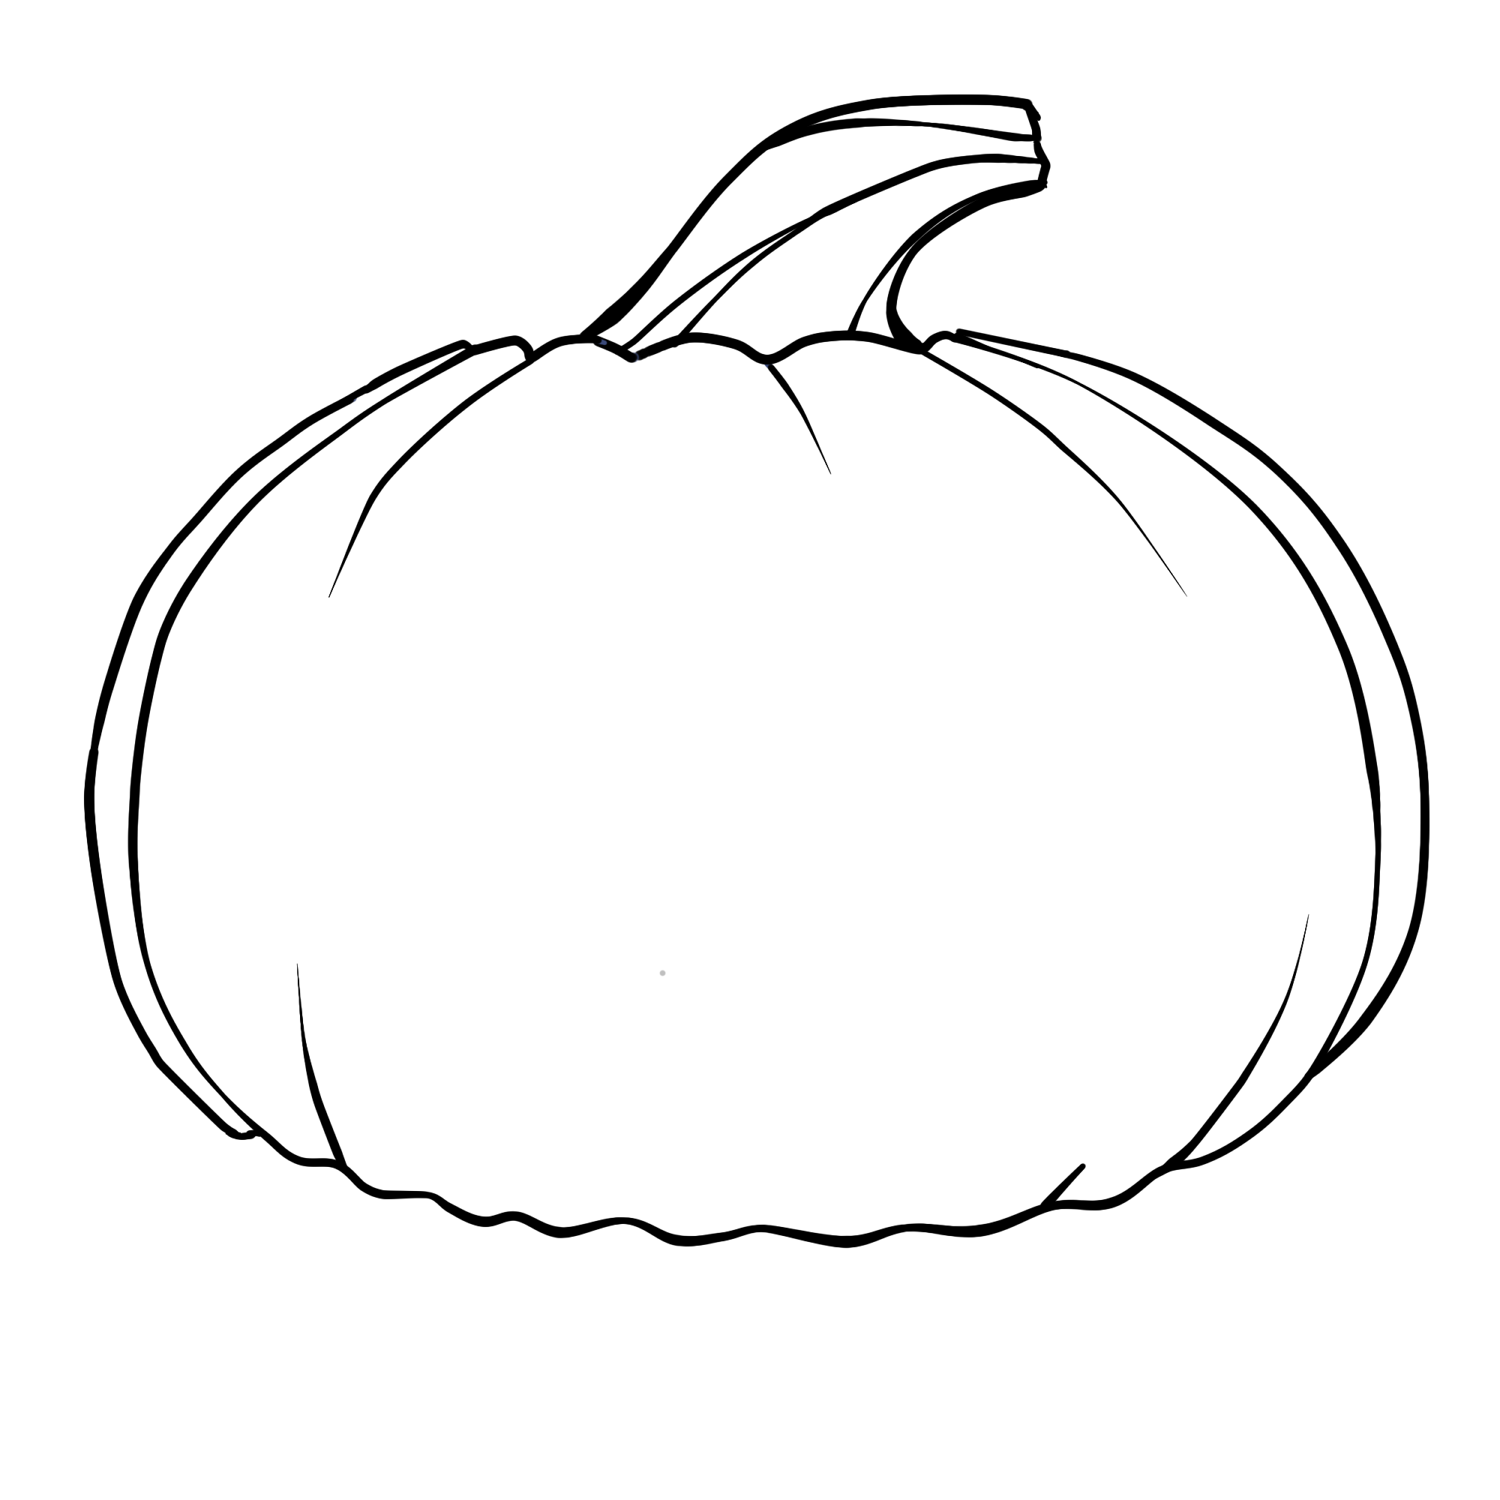 Coloring Page Of A Pumpkin - Coloring Pages for Kids and for Adults